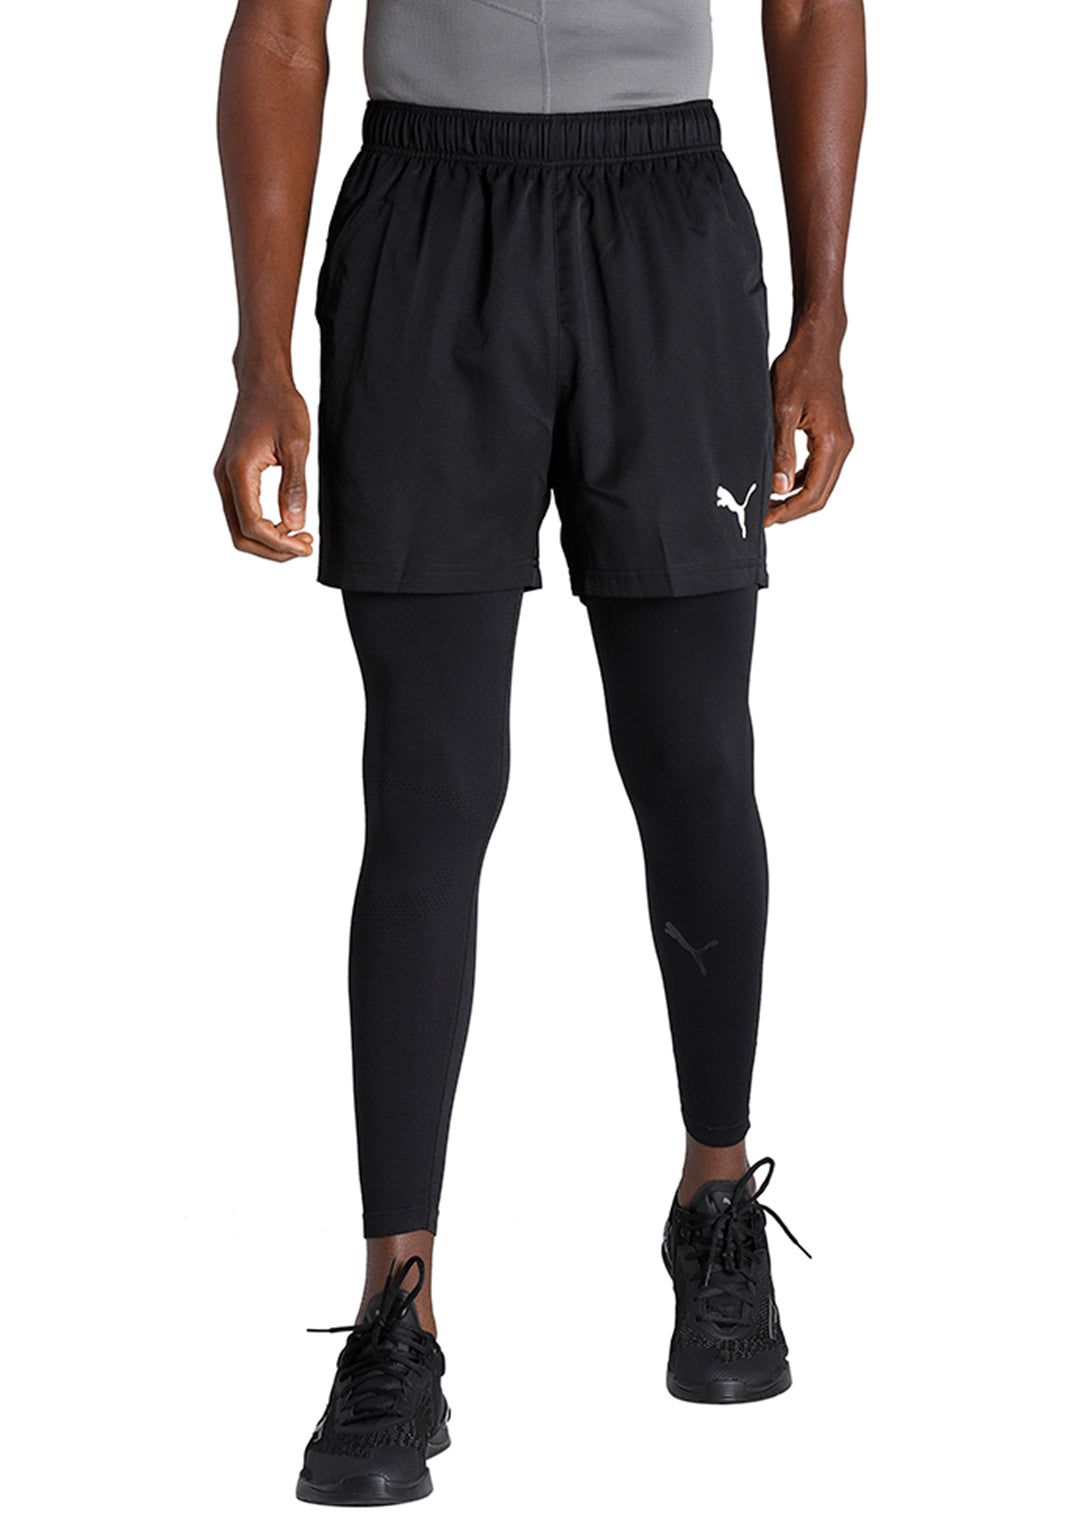 Black Woven Shorts Men From Buy Fancode Active Puma Solid